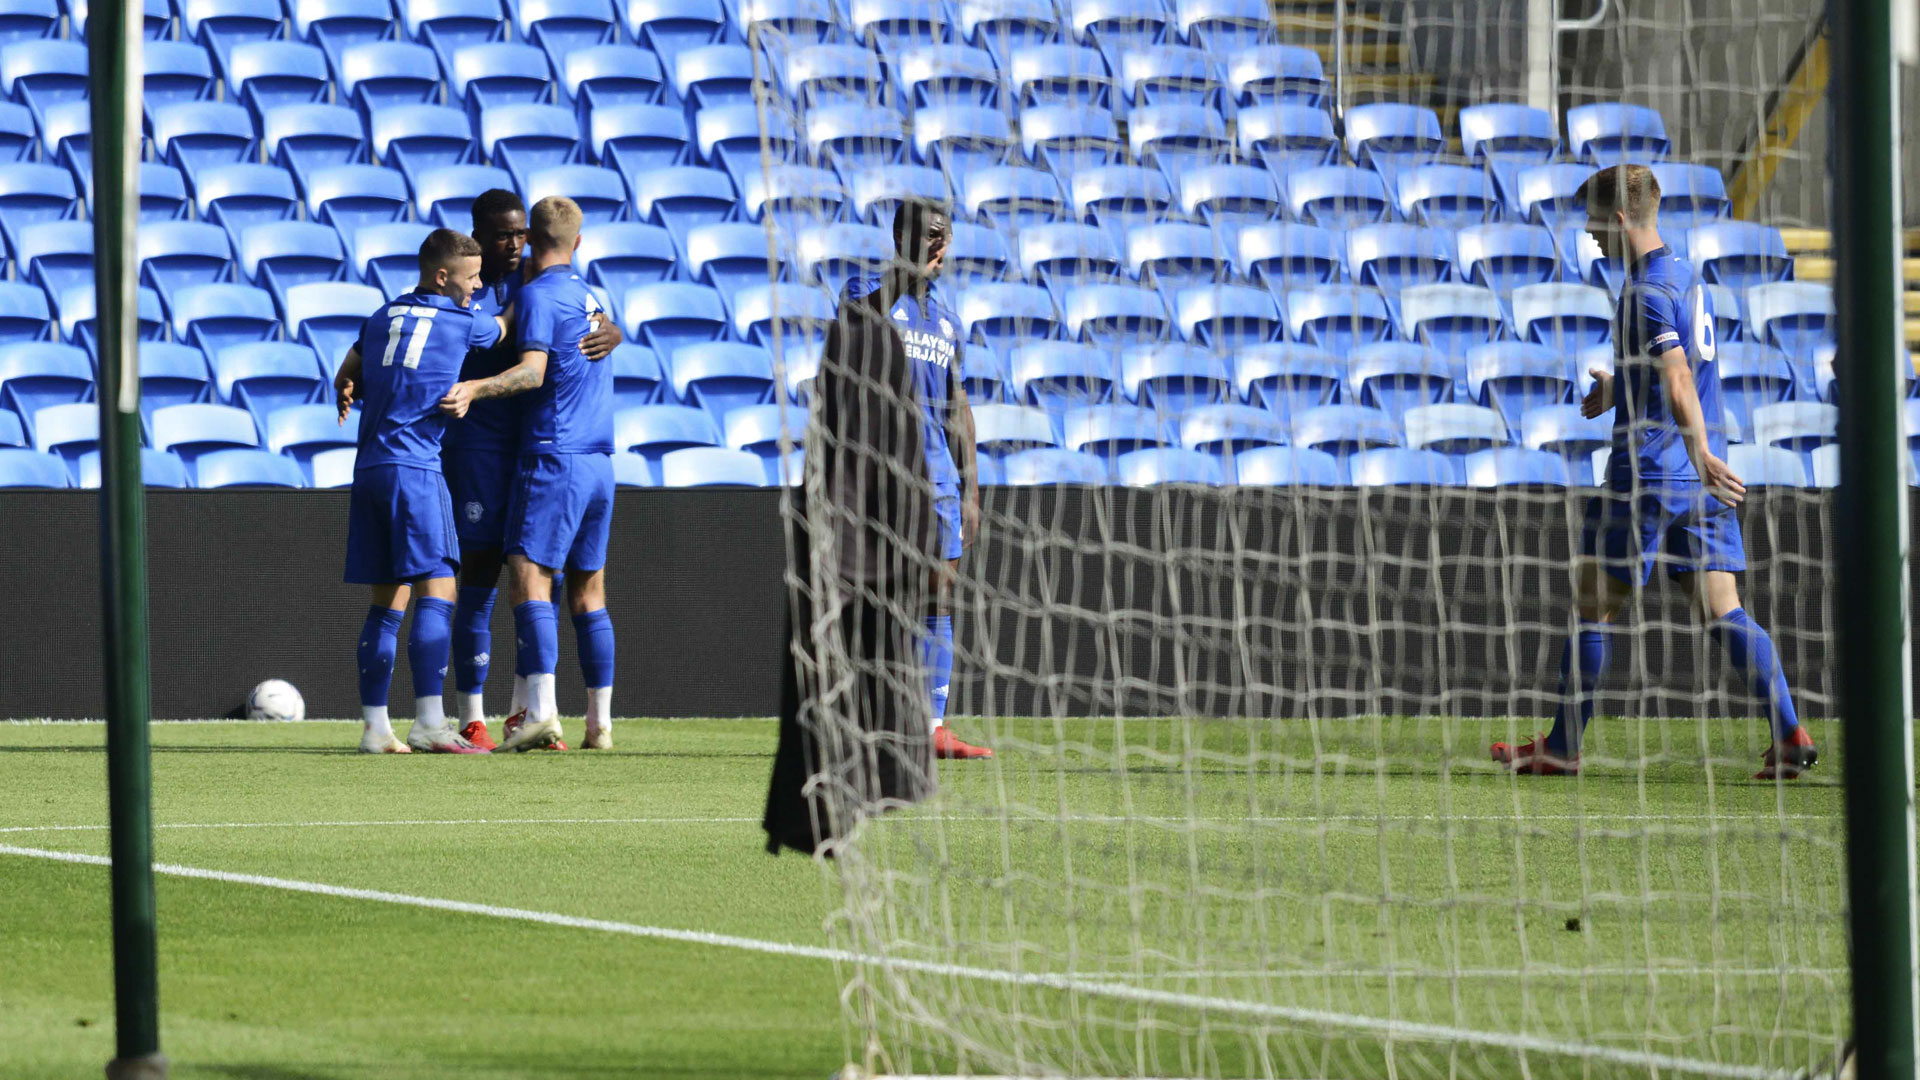 The Bluebirds celebrate their opener at CCS...